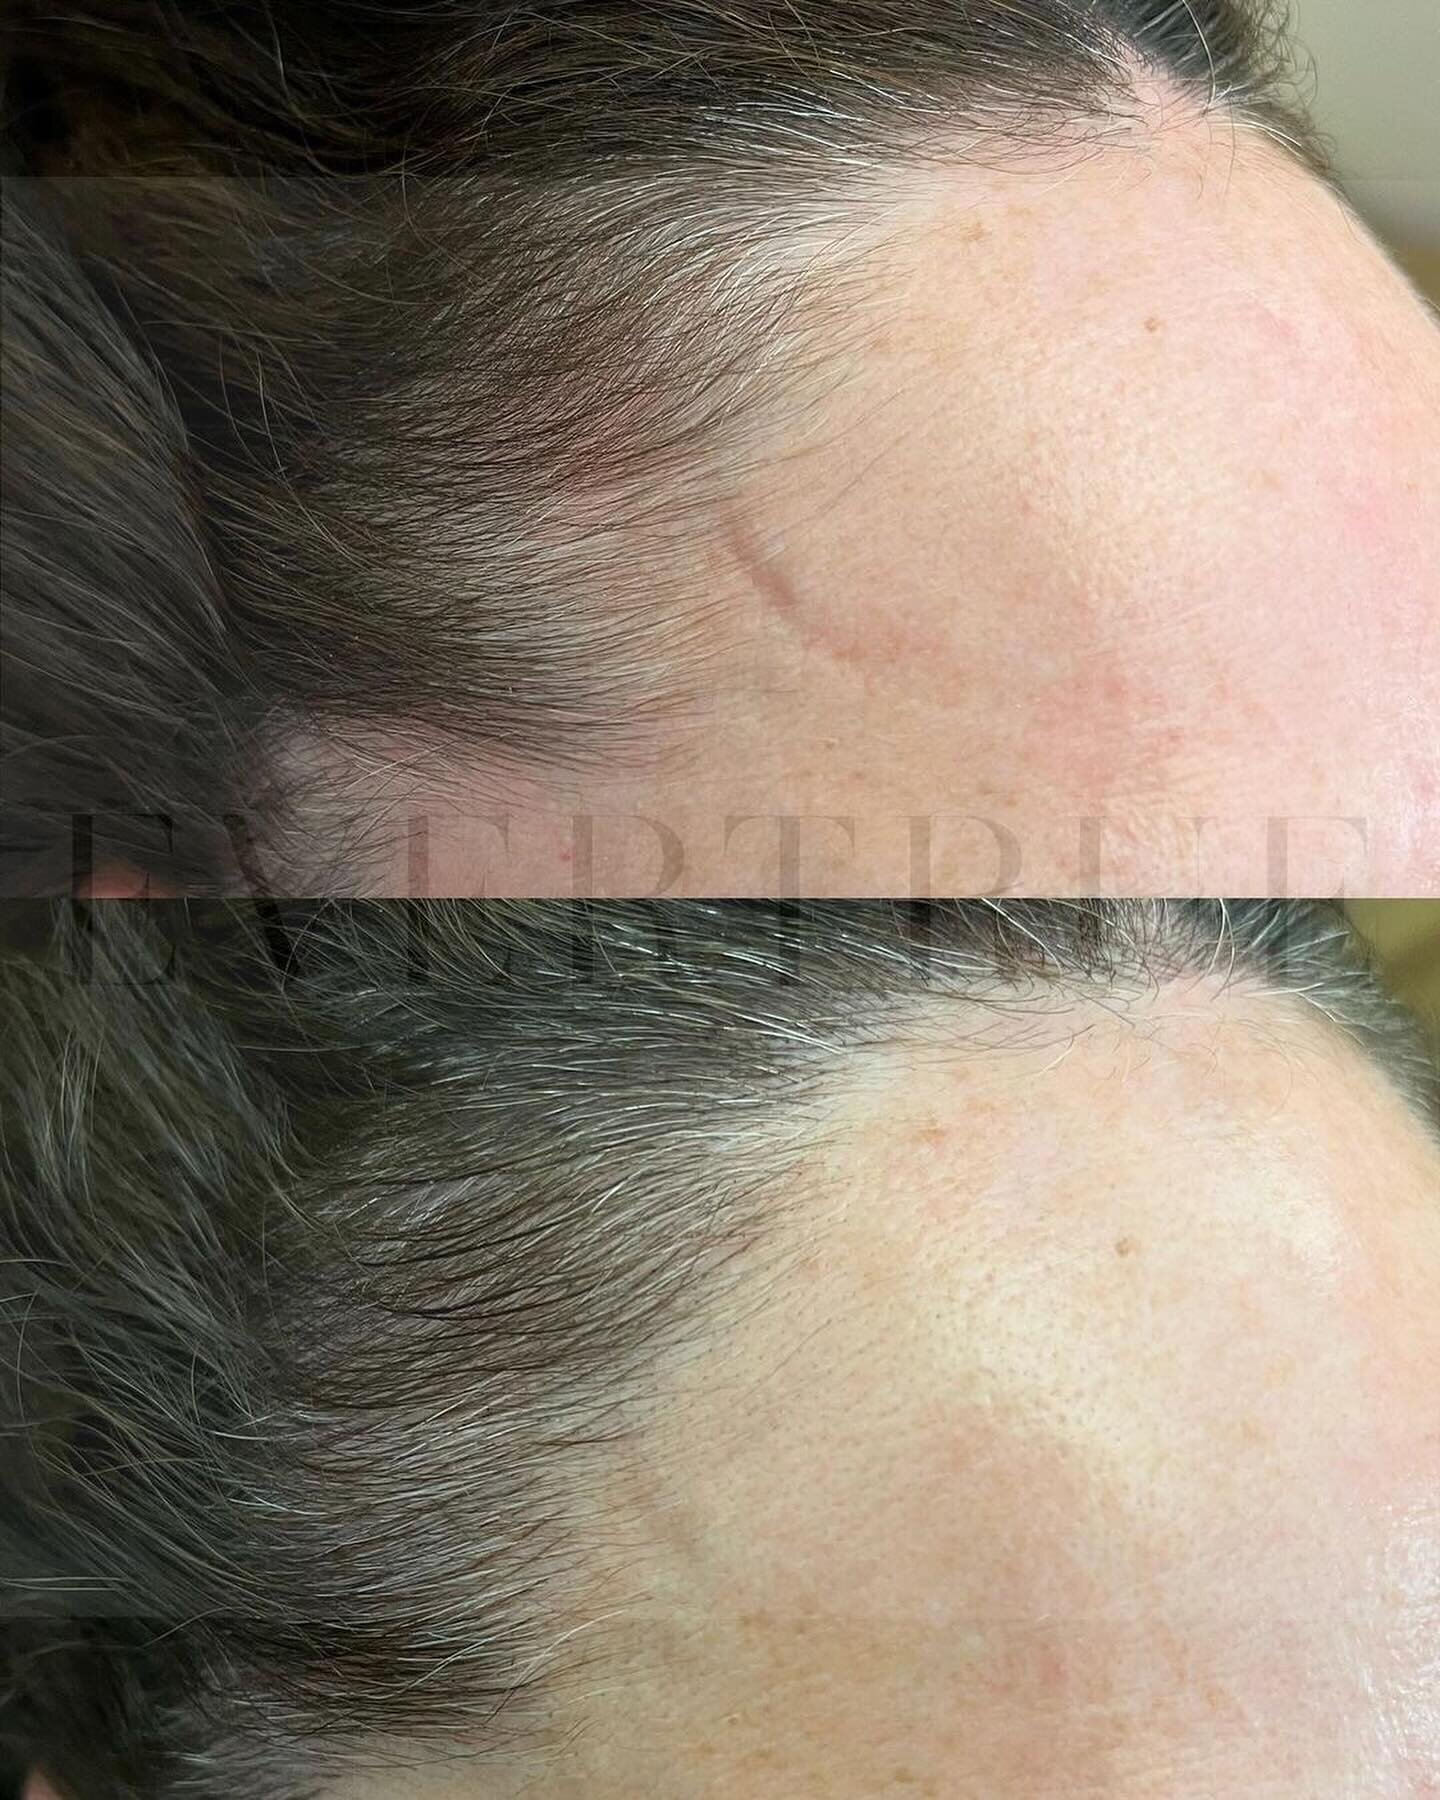 So natural! Instant hairline, with microbladed strokes that seamlessly blend in with existing hair strands. Close to miraculous solution to thinning hair. 
.
Hairline Rescue by Michelle (Master Therapist, NYC)
.
#hairline #hairlinerescue #hairlinetat